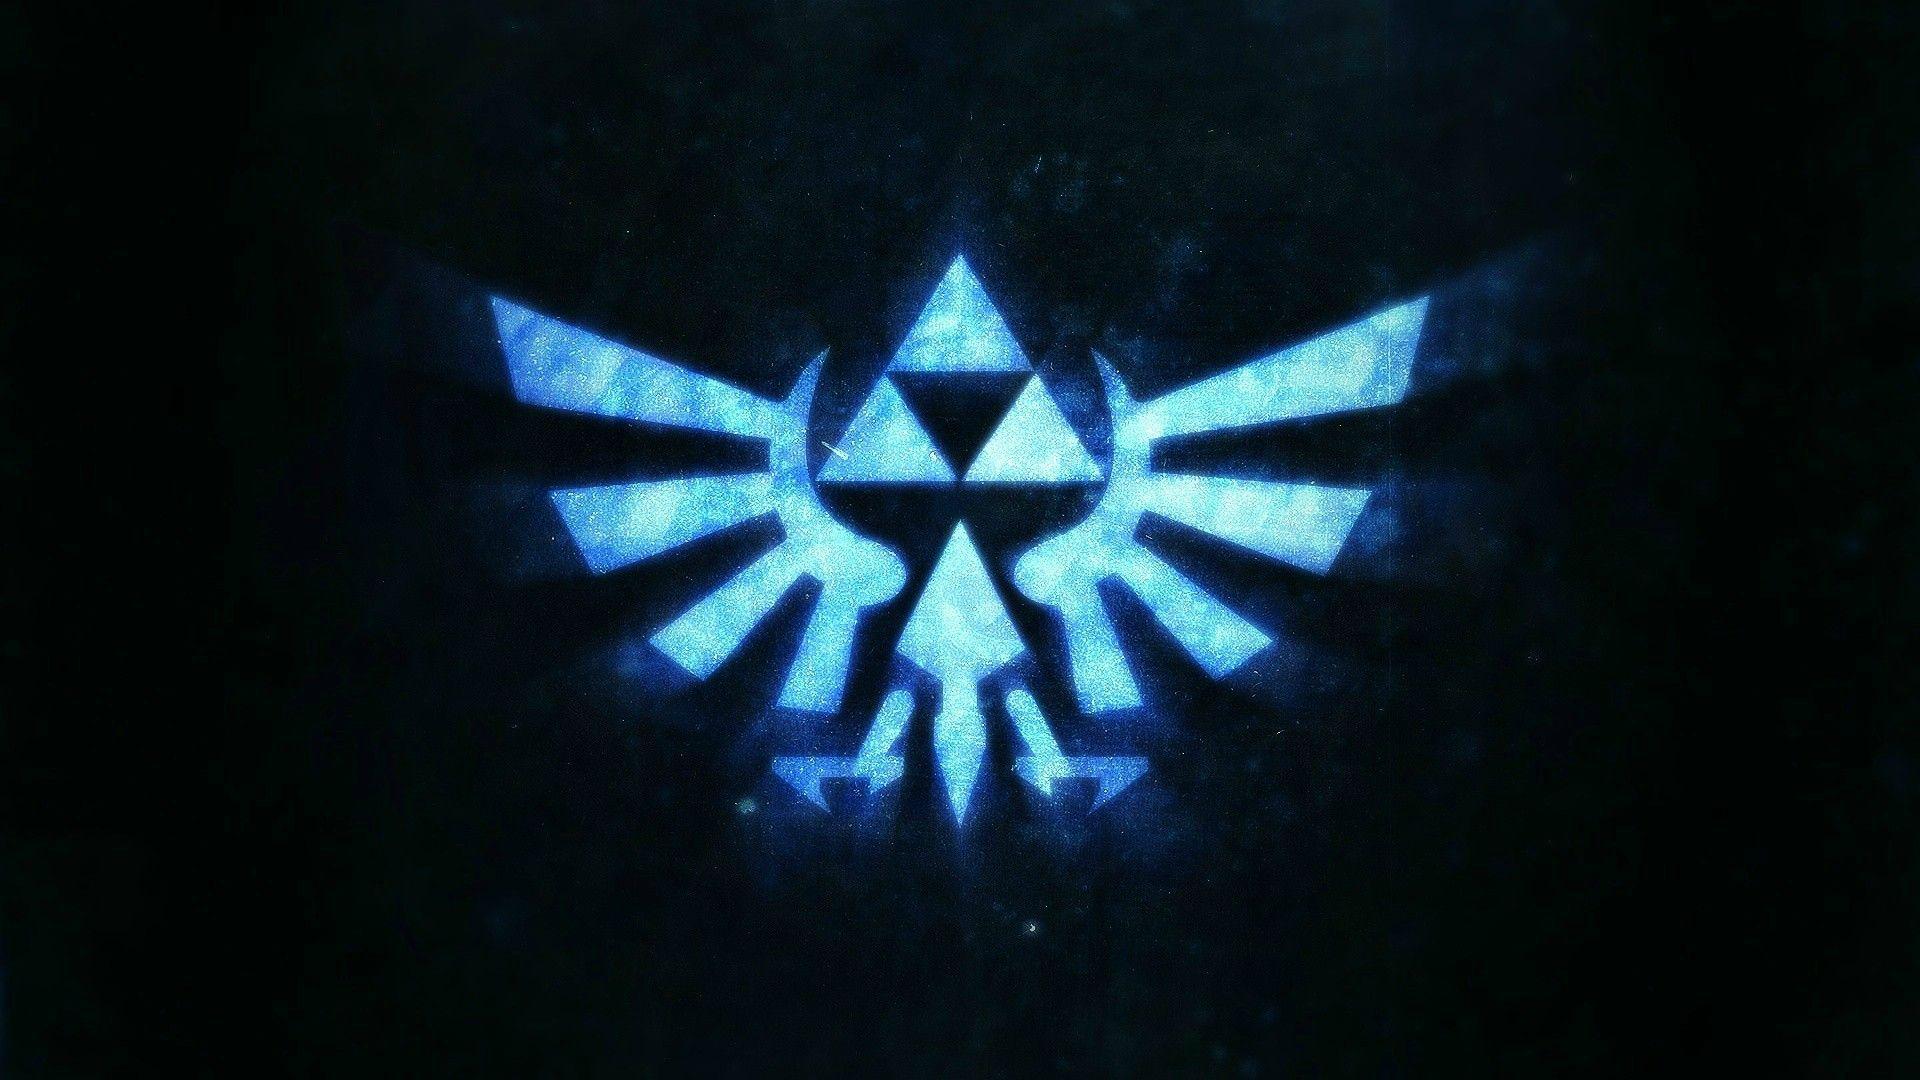 Gaming Wallpaper Games Triforce GB Entertained By Our